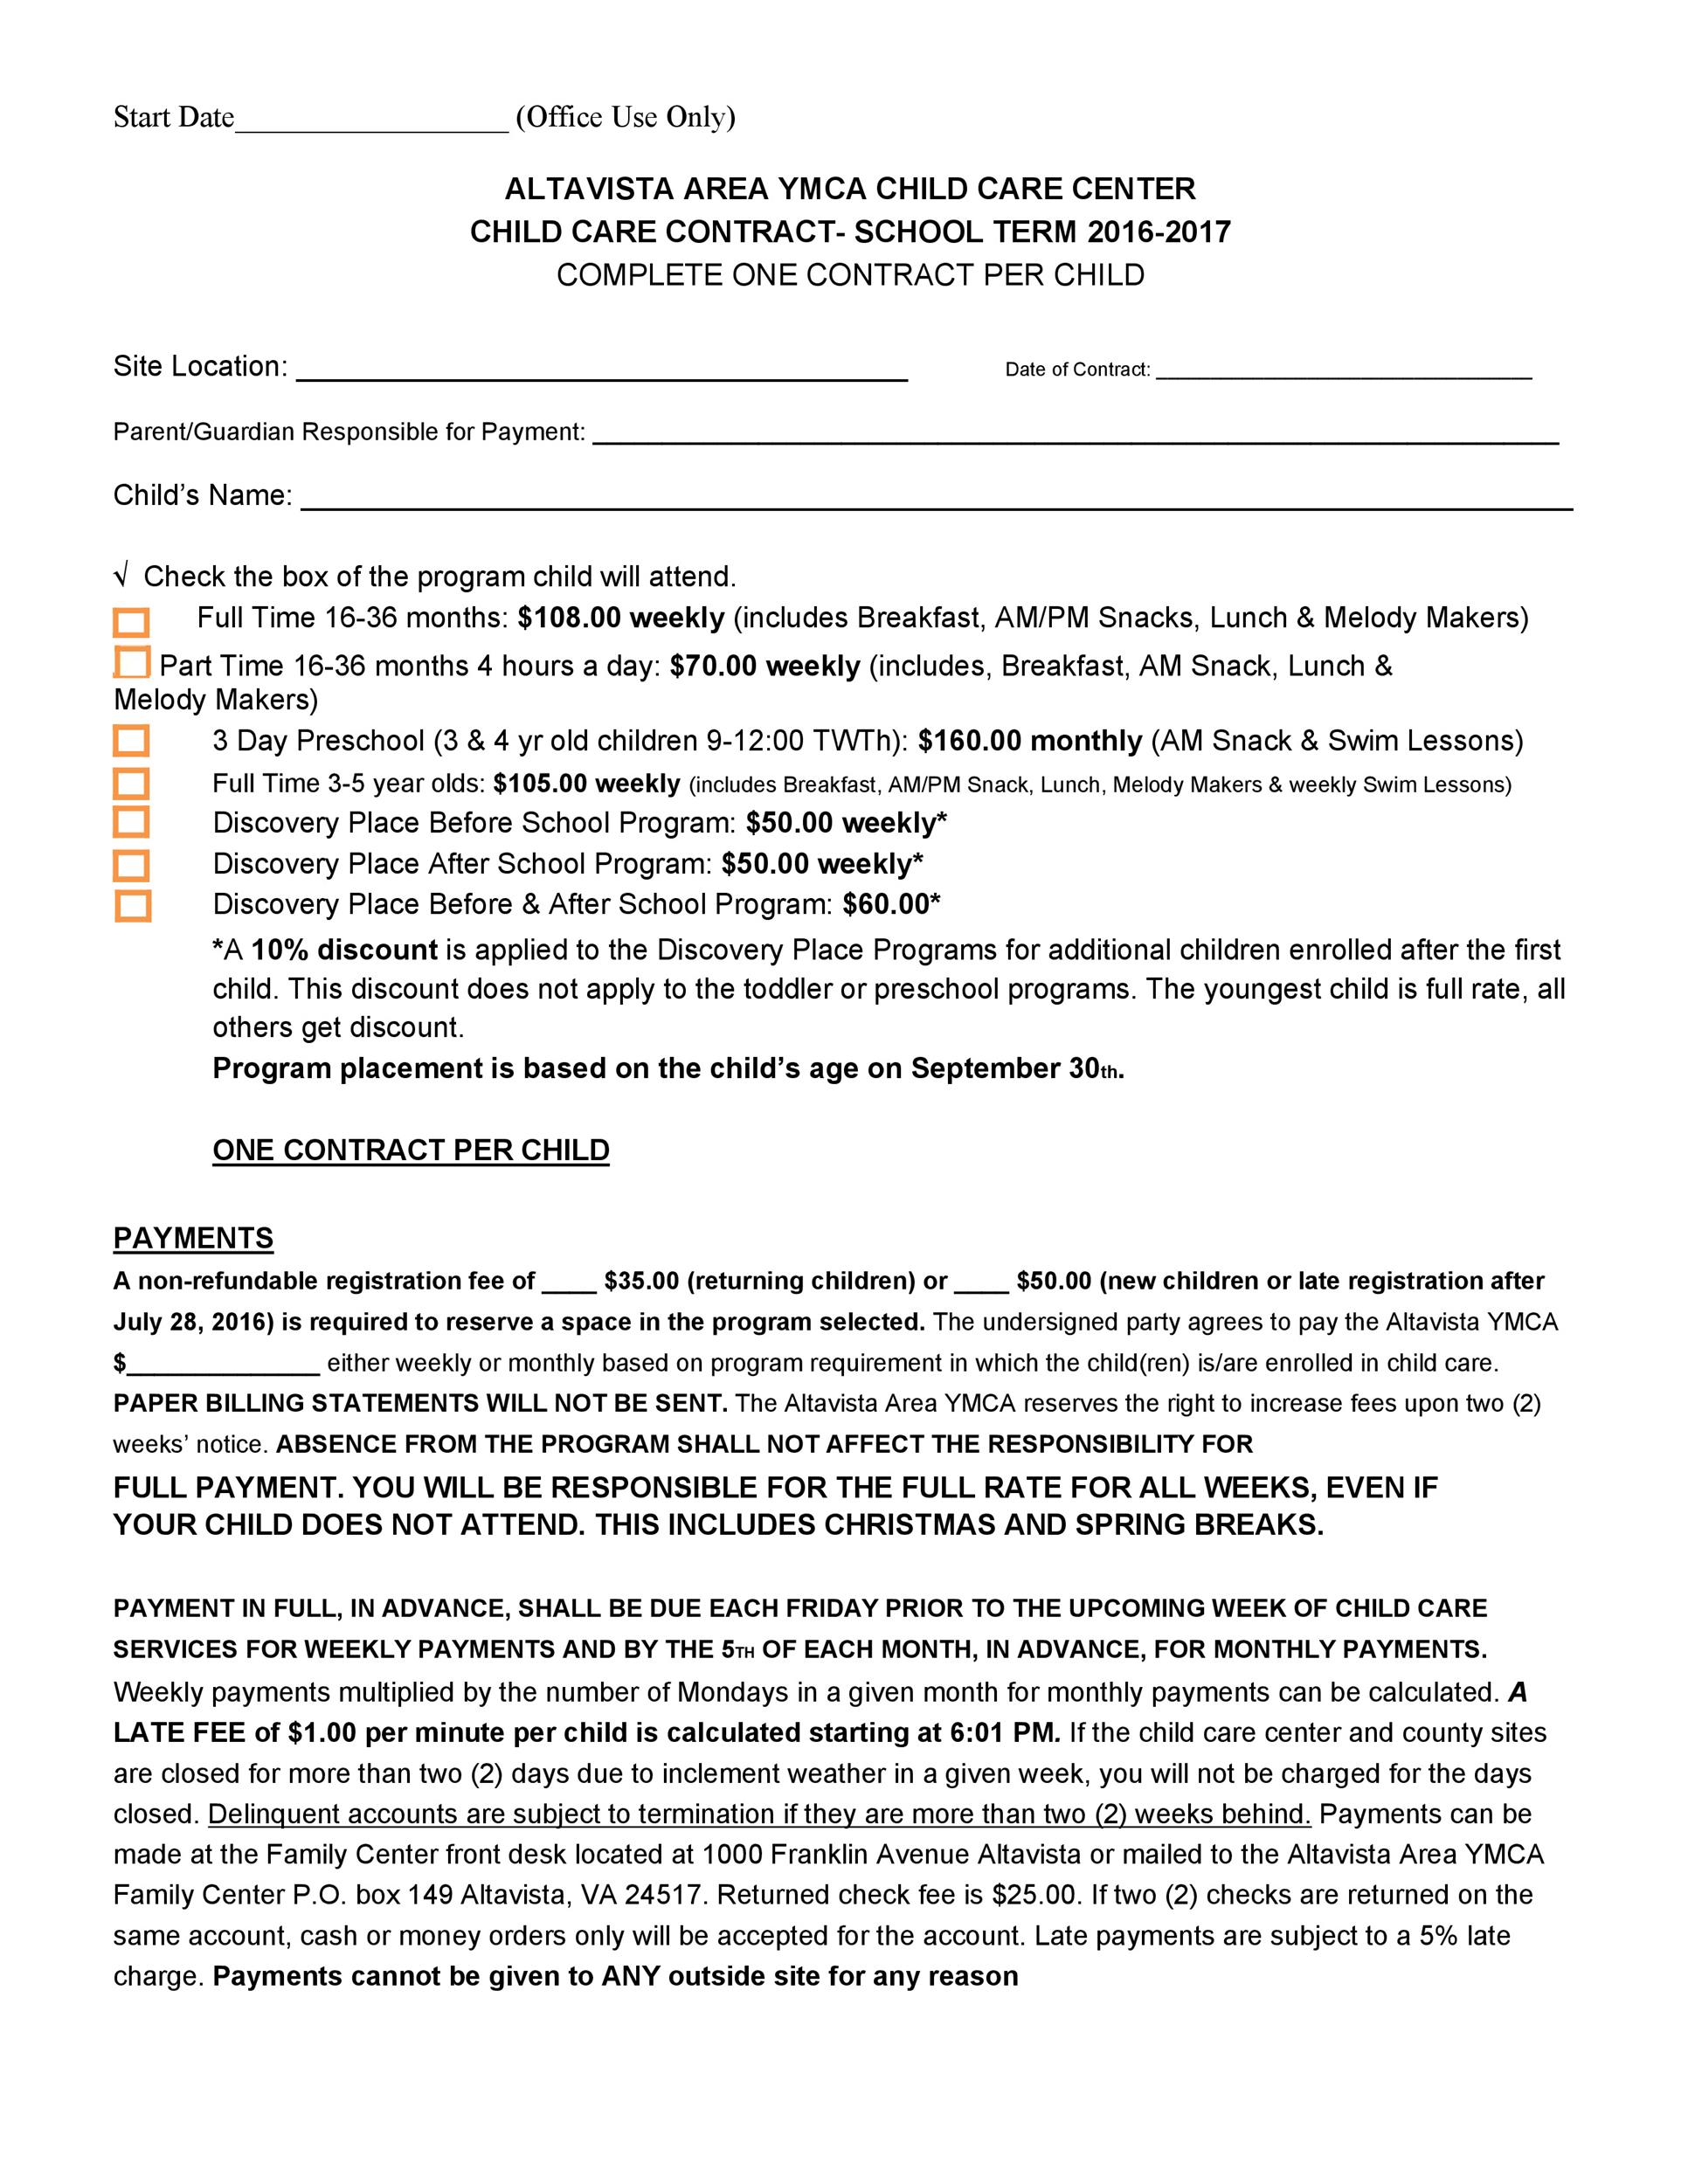 50 Daycare Child Care Babysitting Contract Templates Free ᐅ